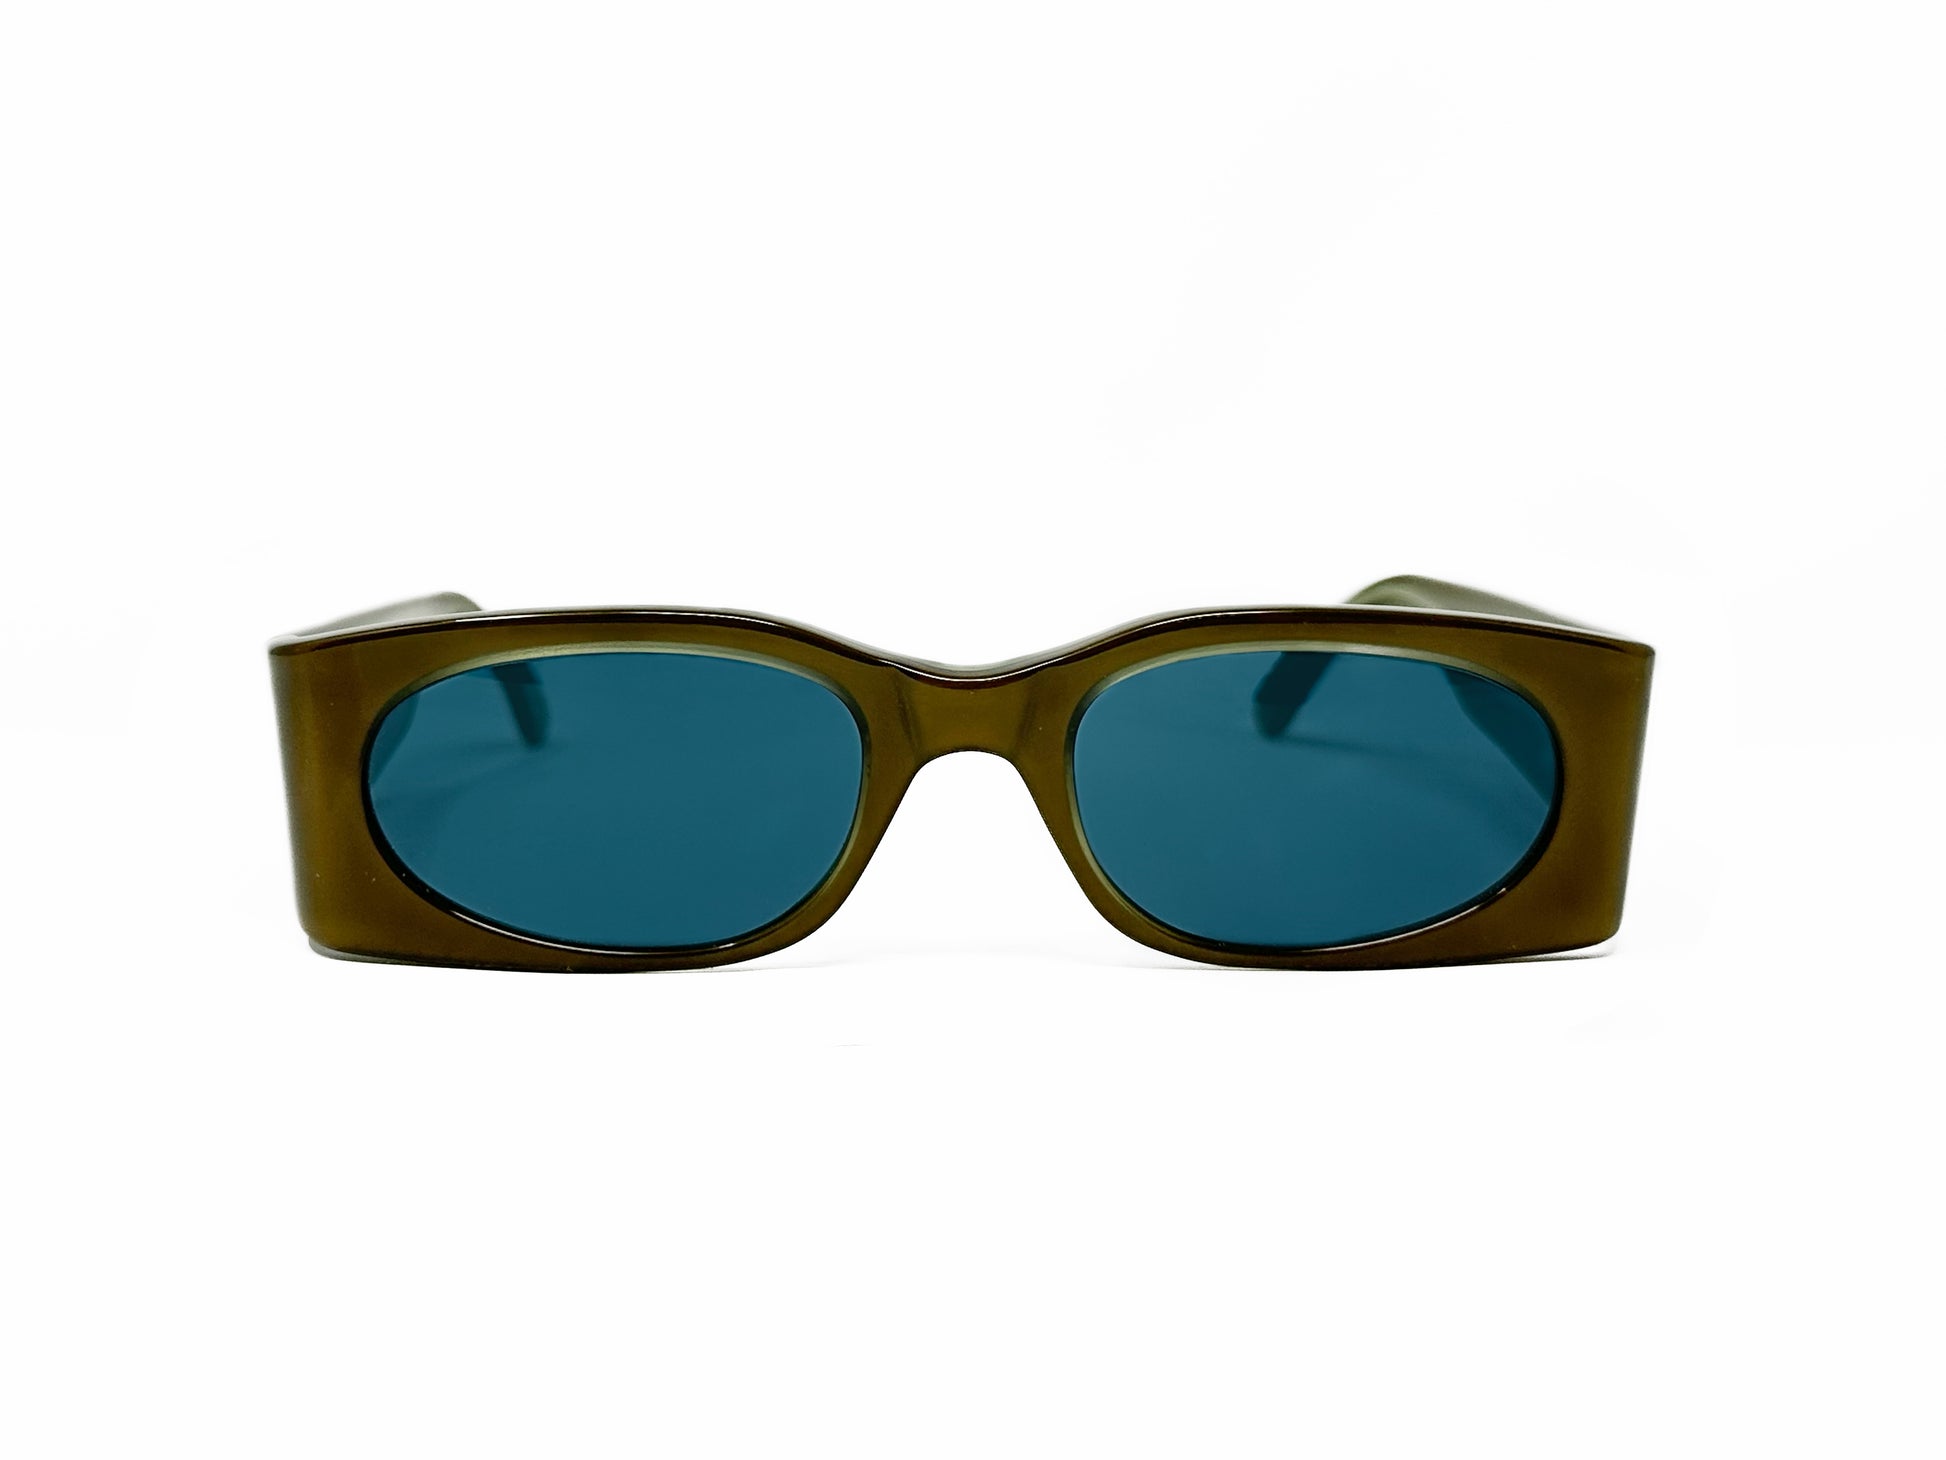 Kador rectangular acetate sunglasses with oval lenses. Model: DF2012. Color: M/1434 - Olive with blue lenses. Front view.